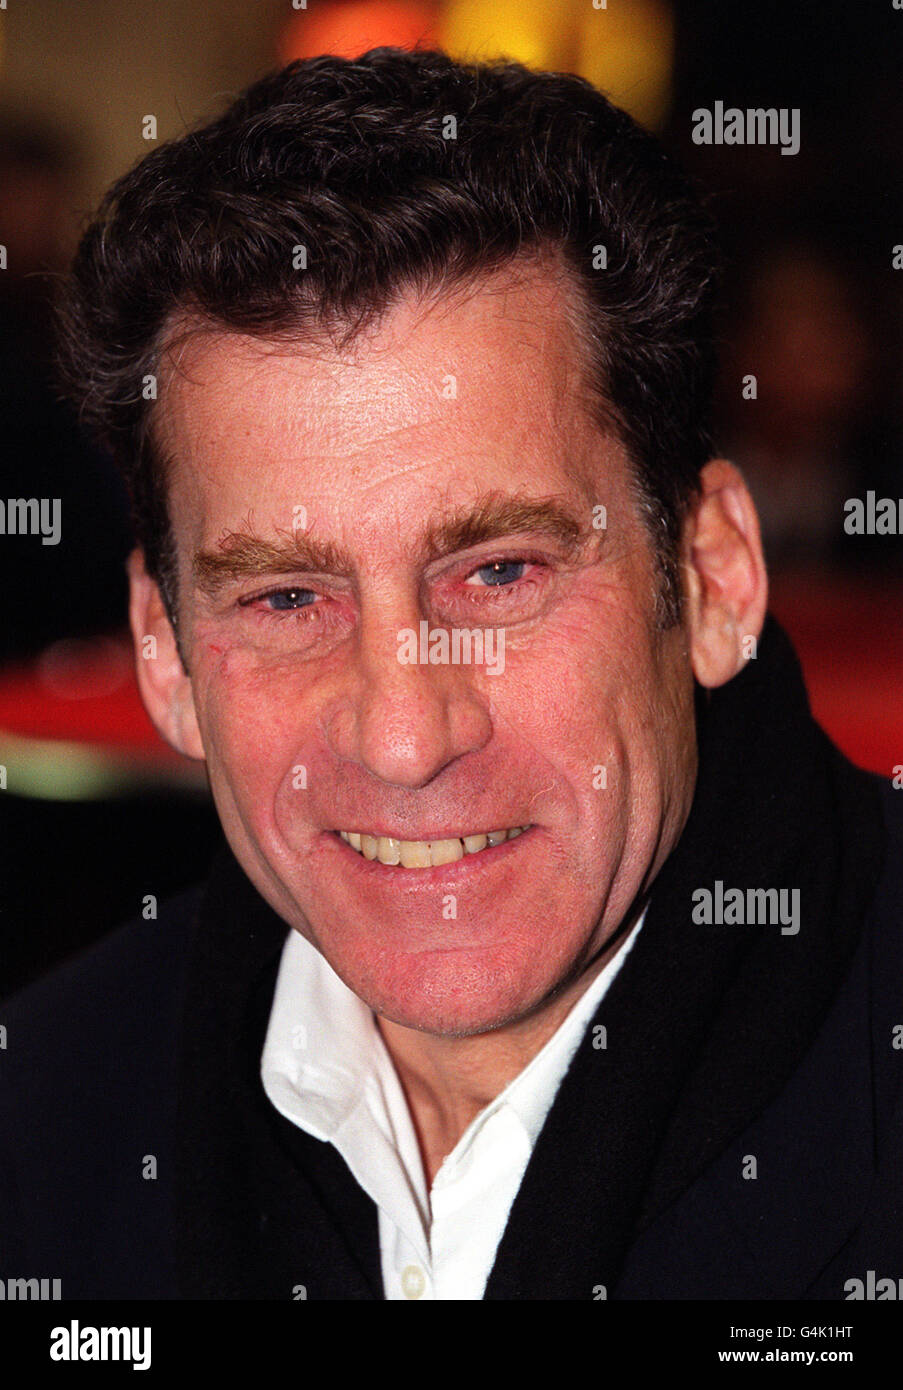 Paul Michael Glaser, who played Starsky in the hit 70's TV show Starsky at the Virgin Megastore in Oxford Street, London, where he joined Antonio Fargas (Huggy Bear) and David Soul (Hutch) to sign copies of three new Starsky and Hutch videos. Stock Photo